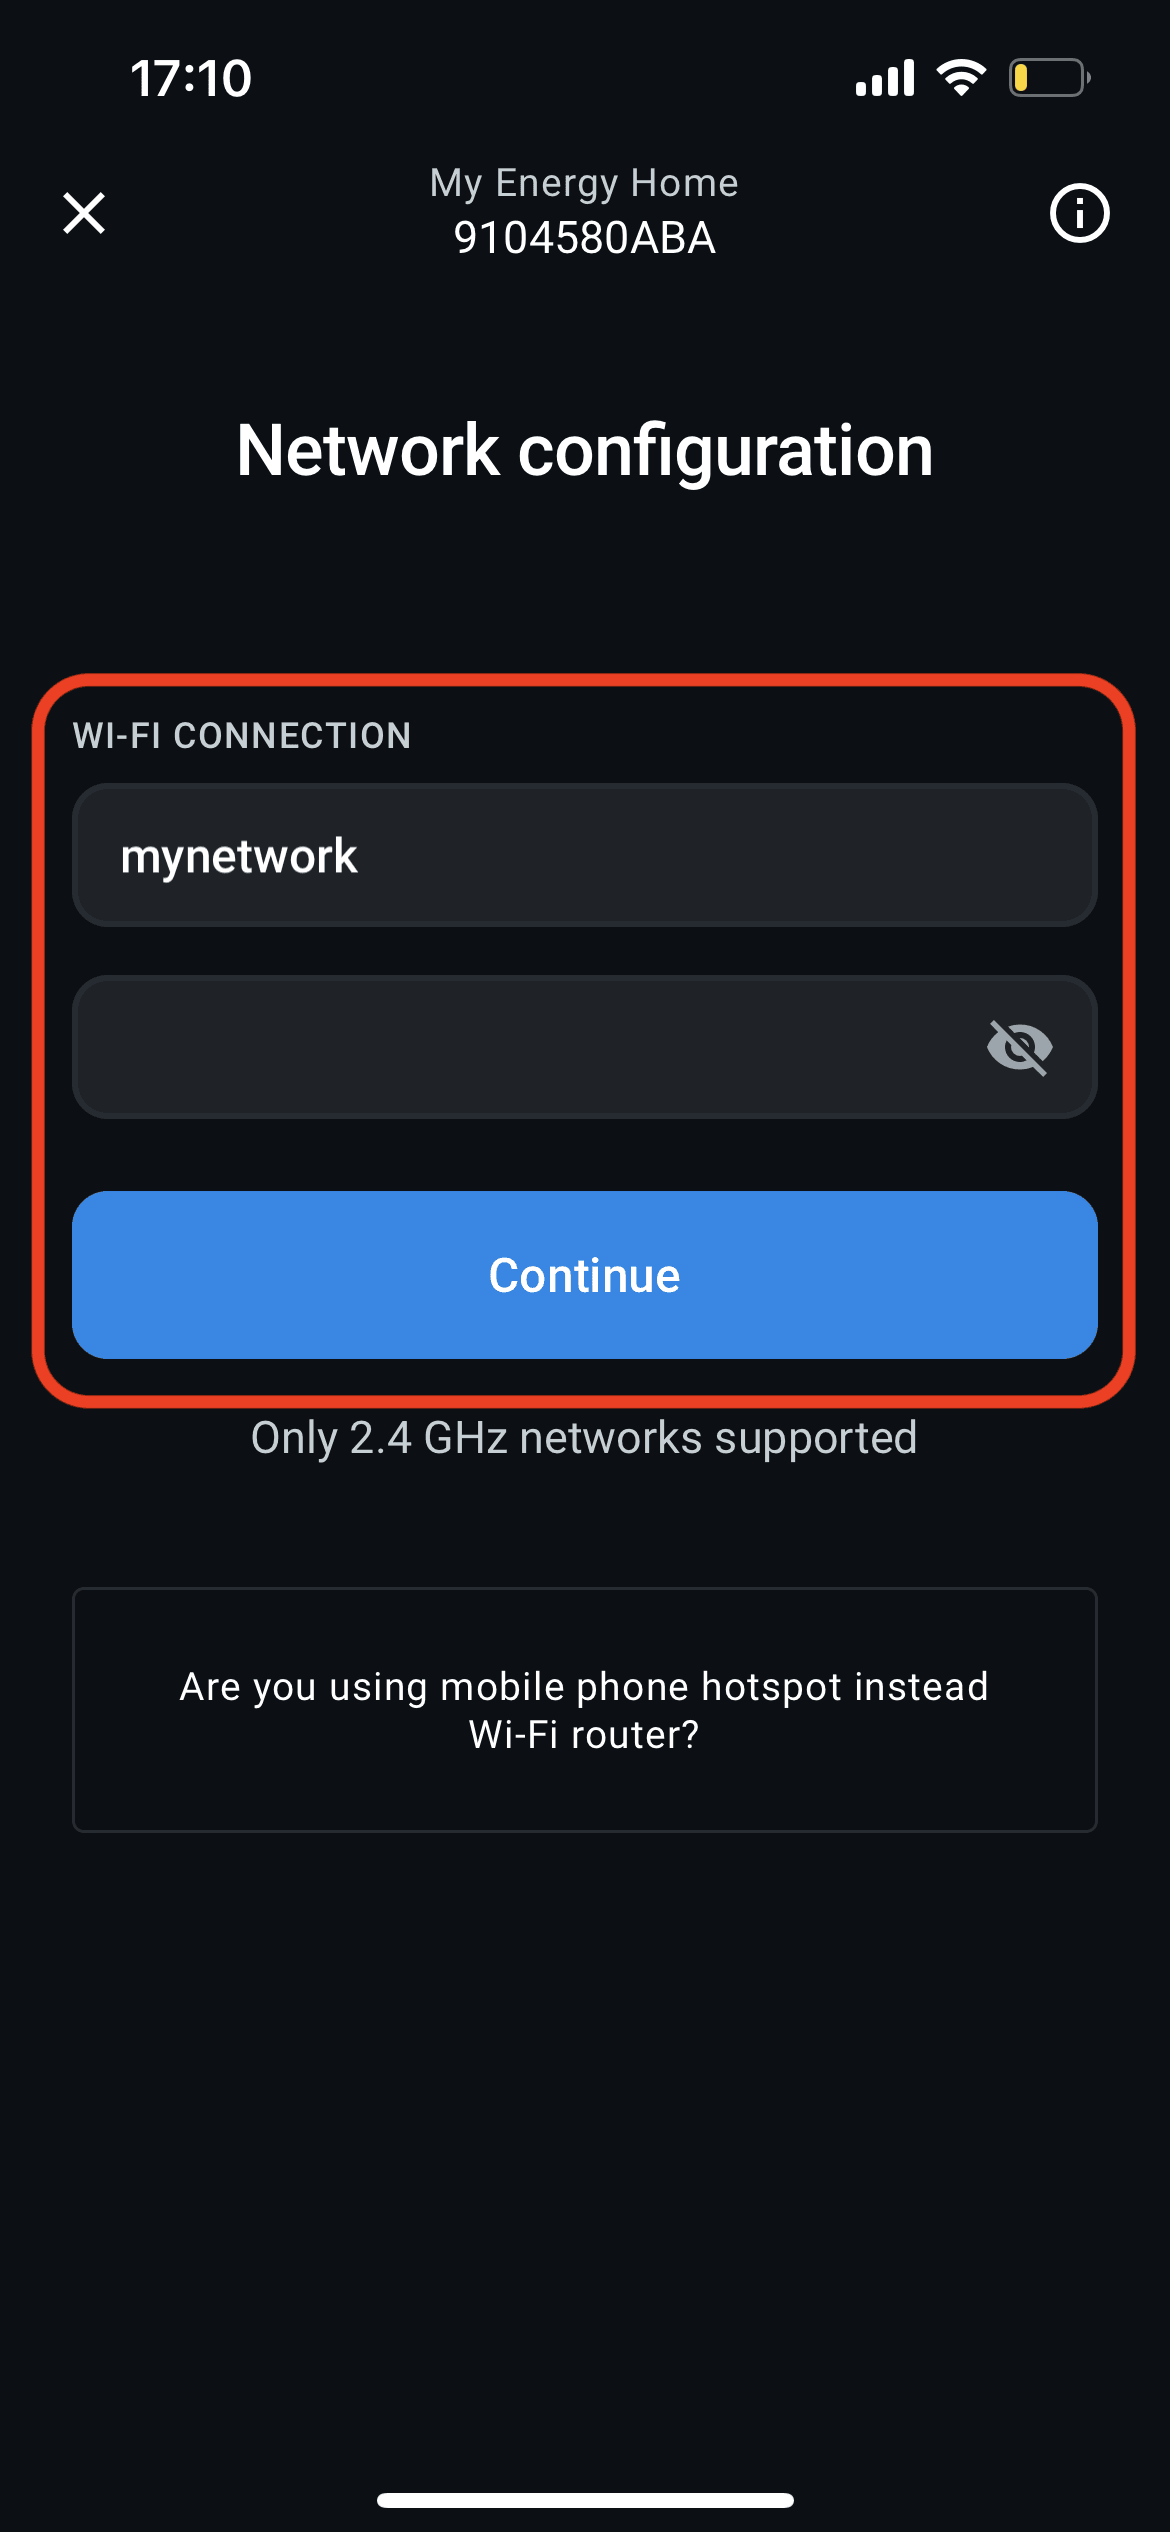 Enter your WiFi SSID and password, and press Continue